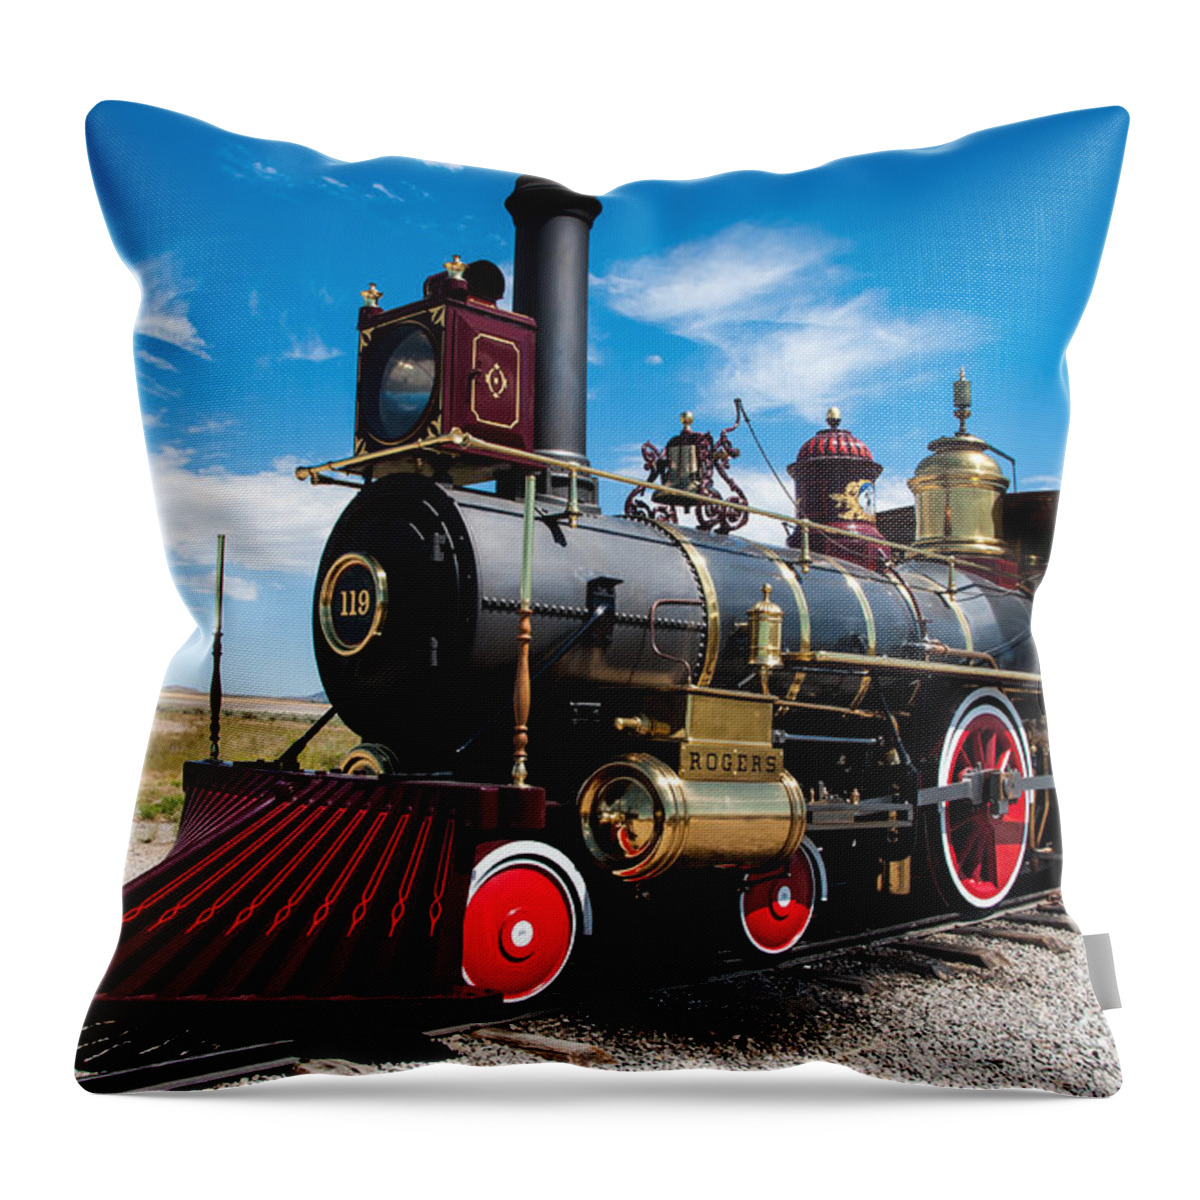 Historic Throw Pillow featuring the photograph Historic Steam Locomotive - Promontory Point by Gary Whitton